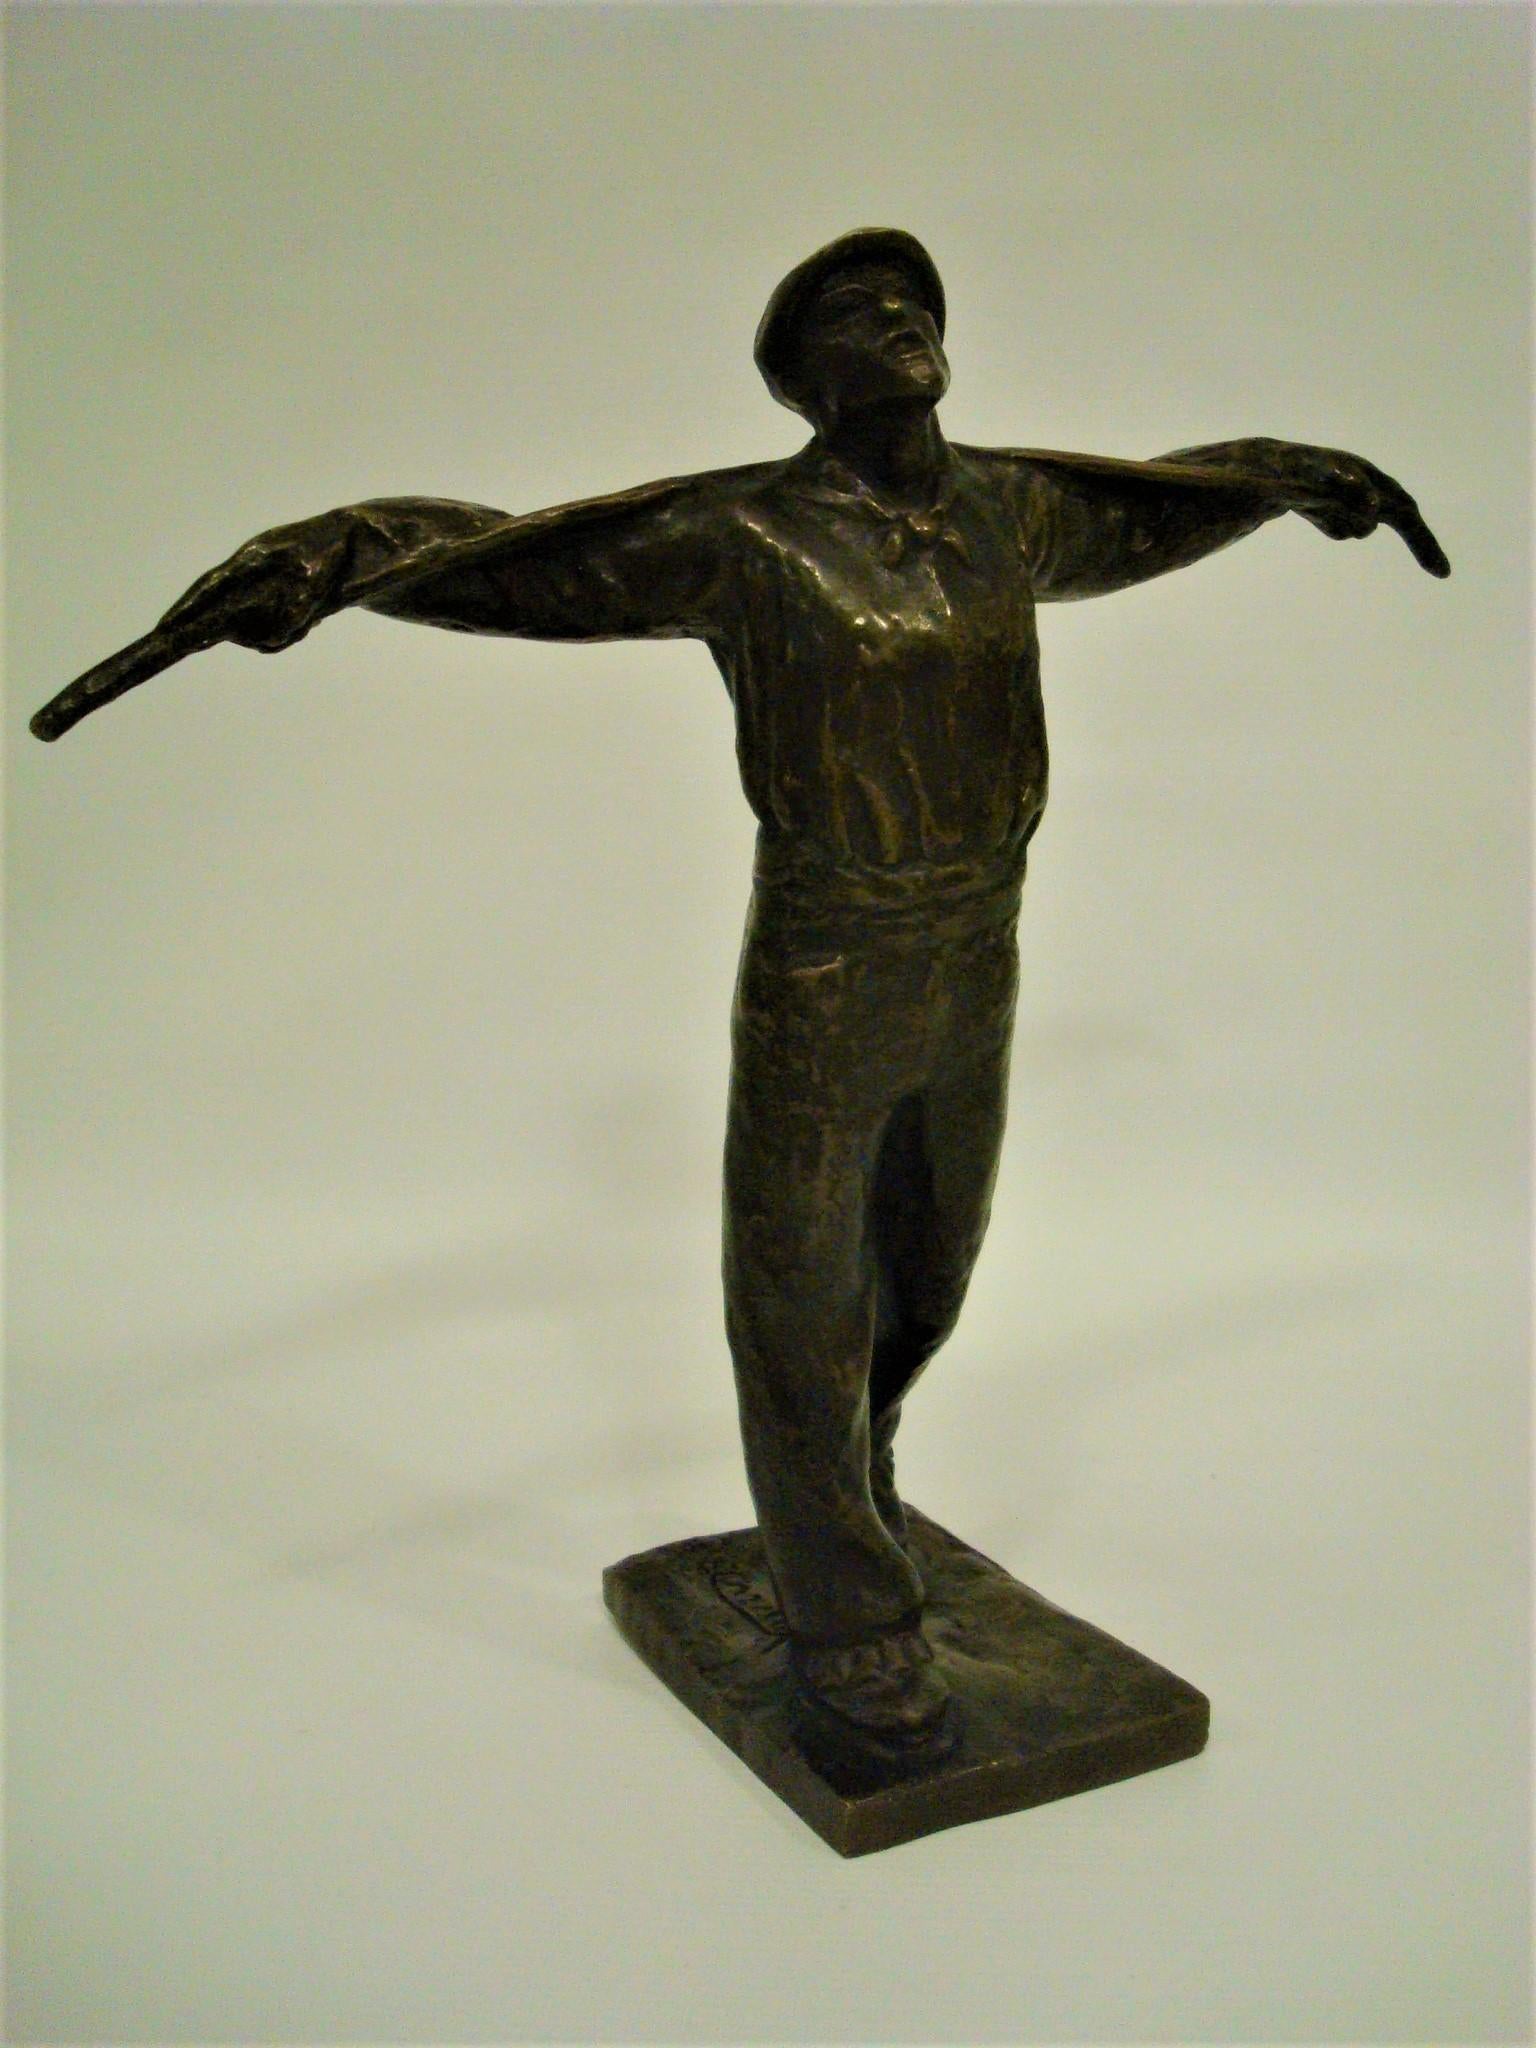 Art Deco working man bronze sculpture. Edouard Cazaux. France 1920's.
Edouard Cazaux is one of the most important artist associated with the French Art Deco movement. He was a sculptor and ceramist, who learned his art when he was very young. A